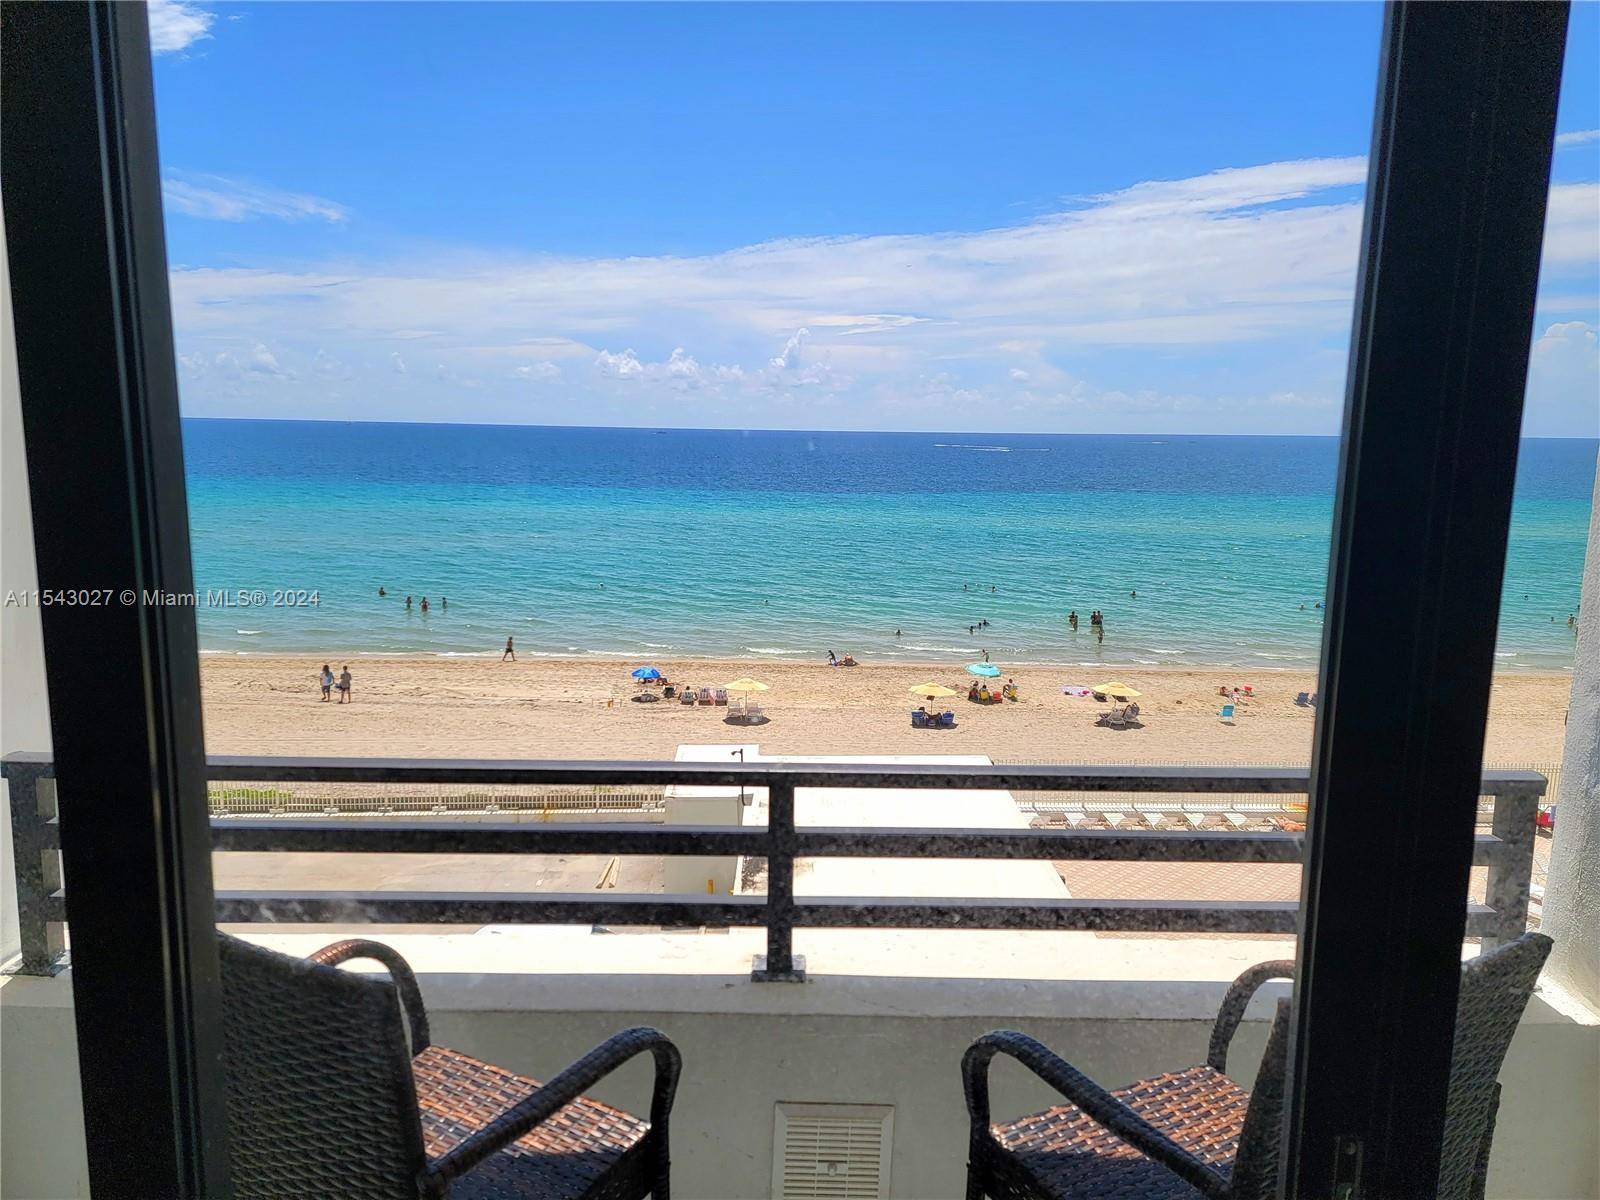 Panoramic Direct Ocean Views, Highly Desirable and Rarely Available Large Corner 2 Bedroom 2 Bathroom Condo, Can Be Leased 12x Year, 30 Day Min.